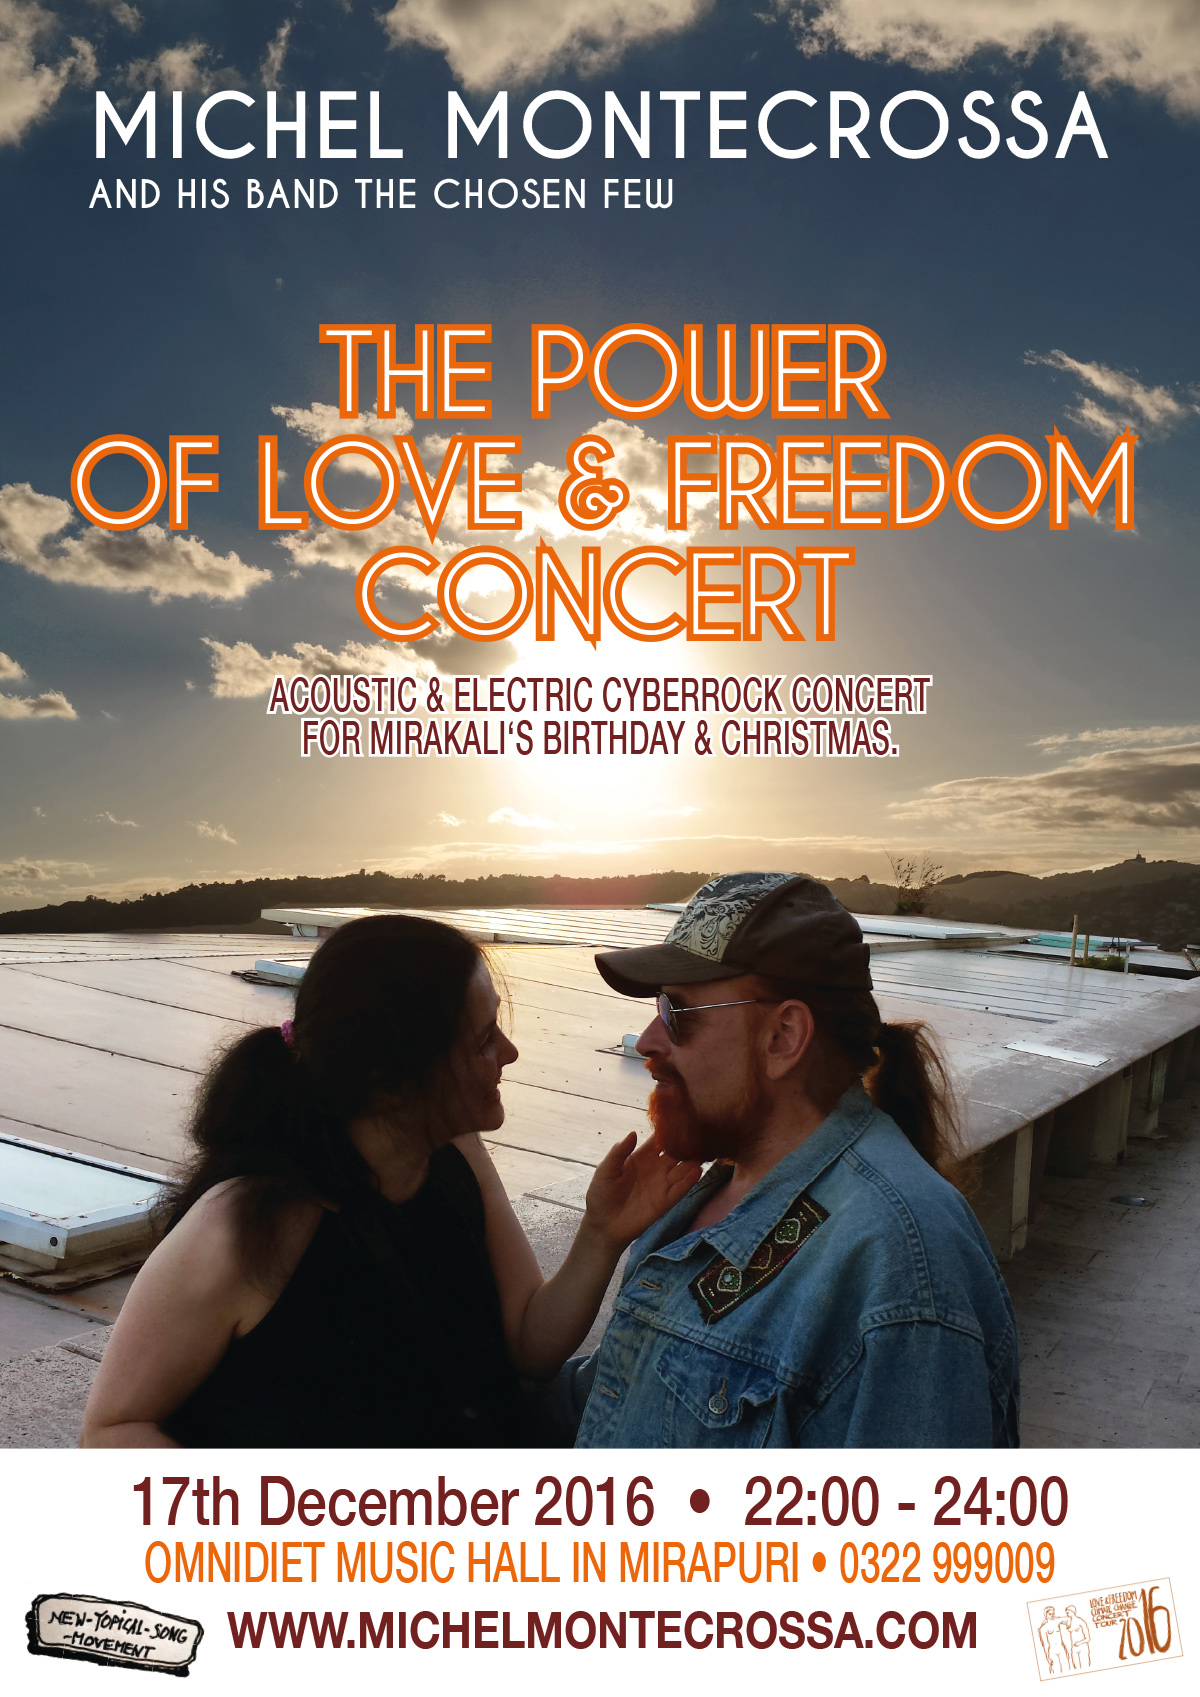 The Power of Love & Freedom Concert